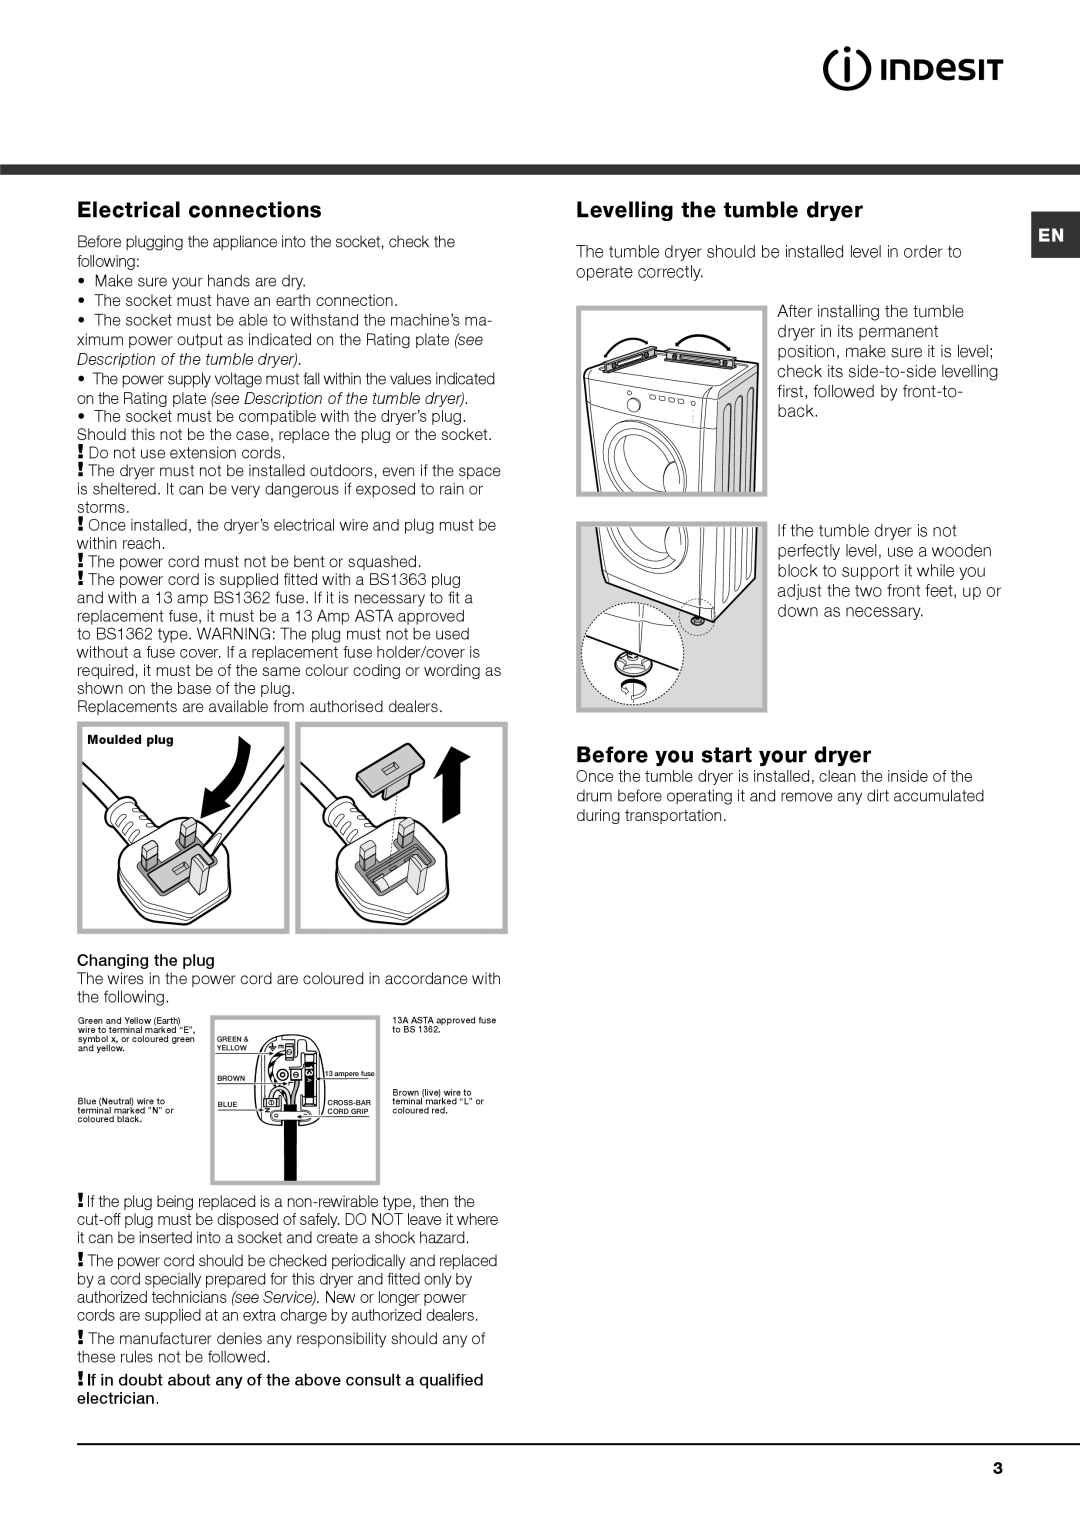 Indesit IDVA 735 S instruction manual Electrical connections, Levelling the tumble dryer, Before you start your dryer 